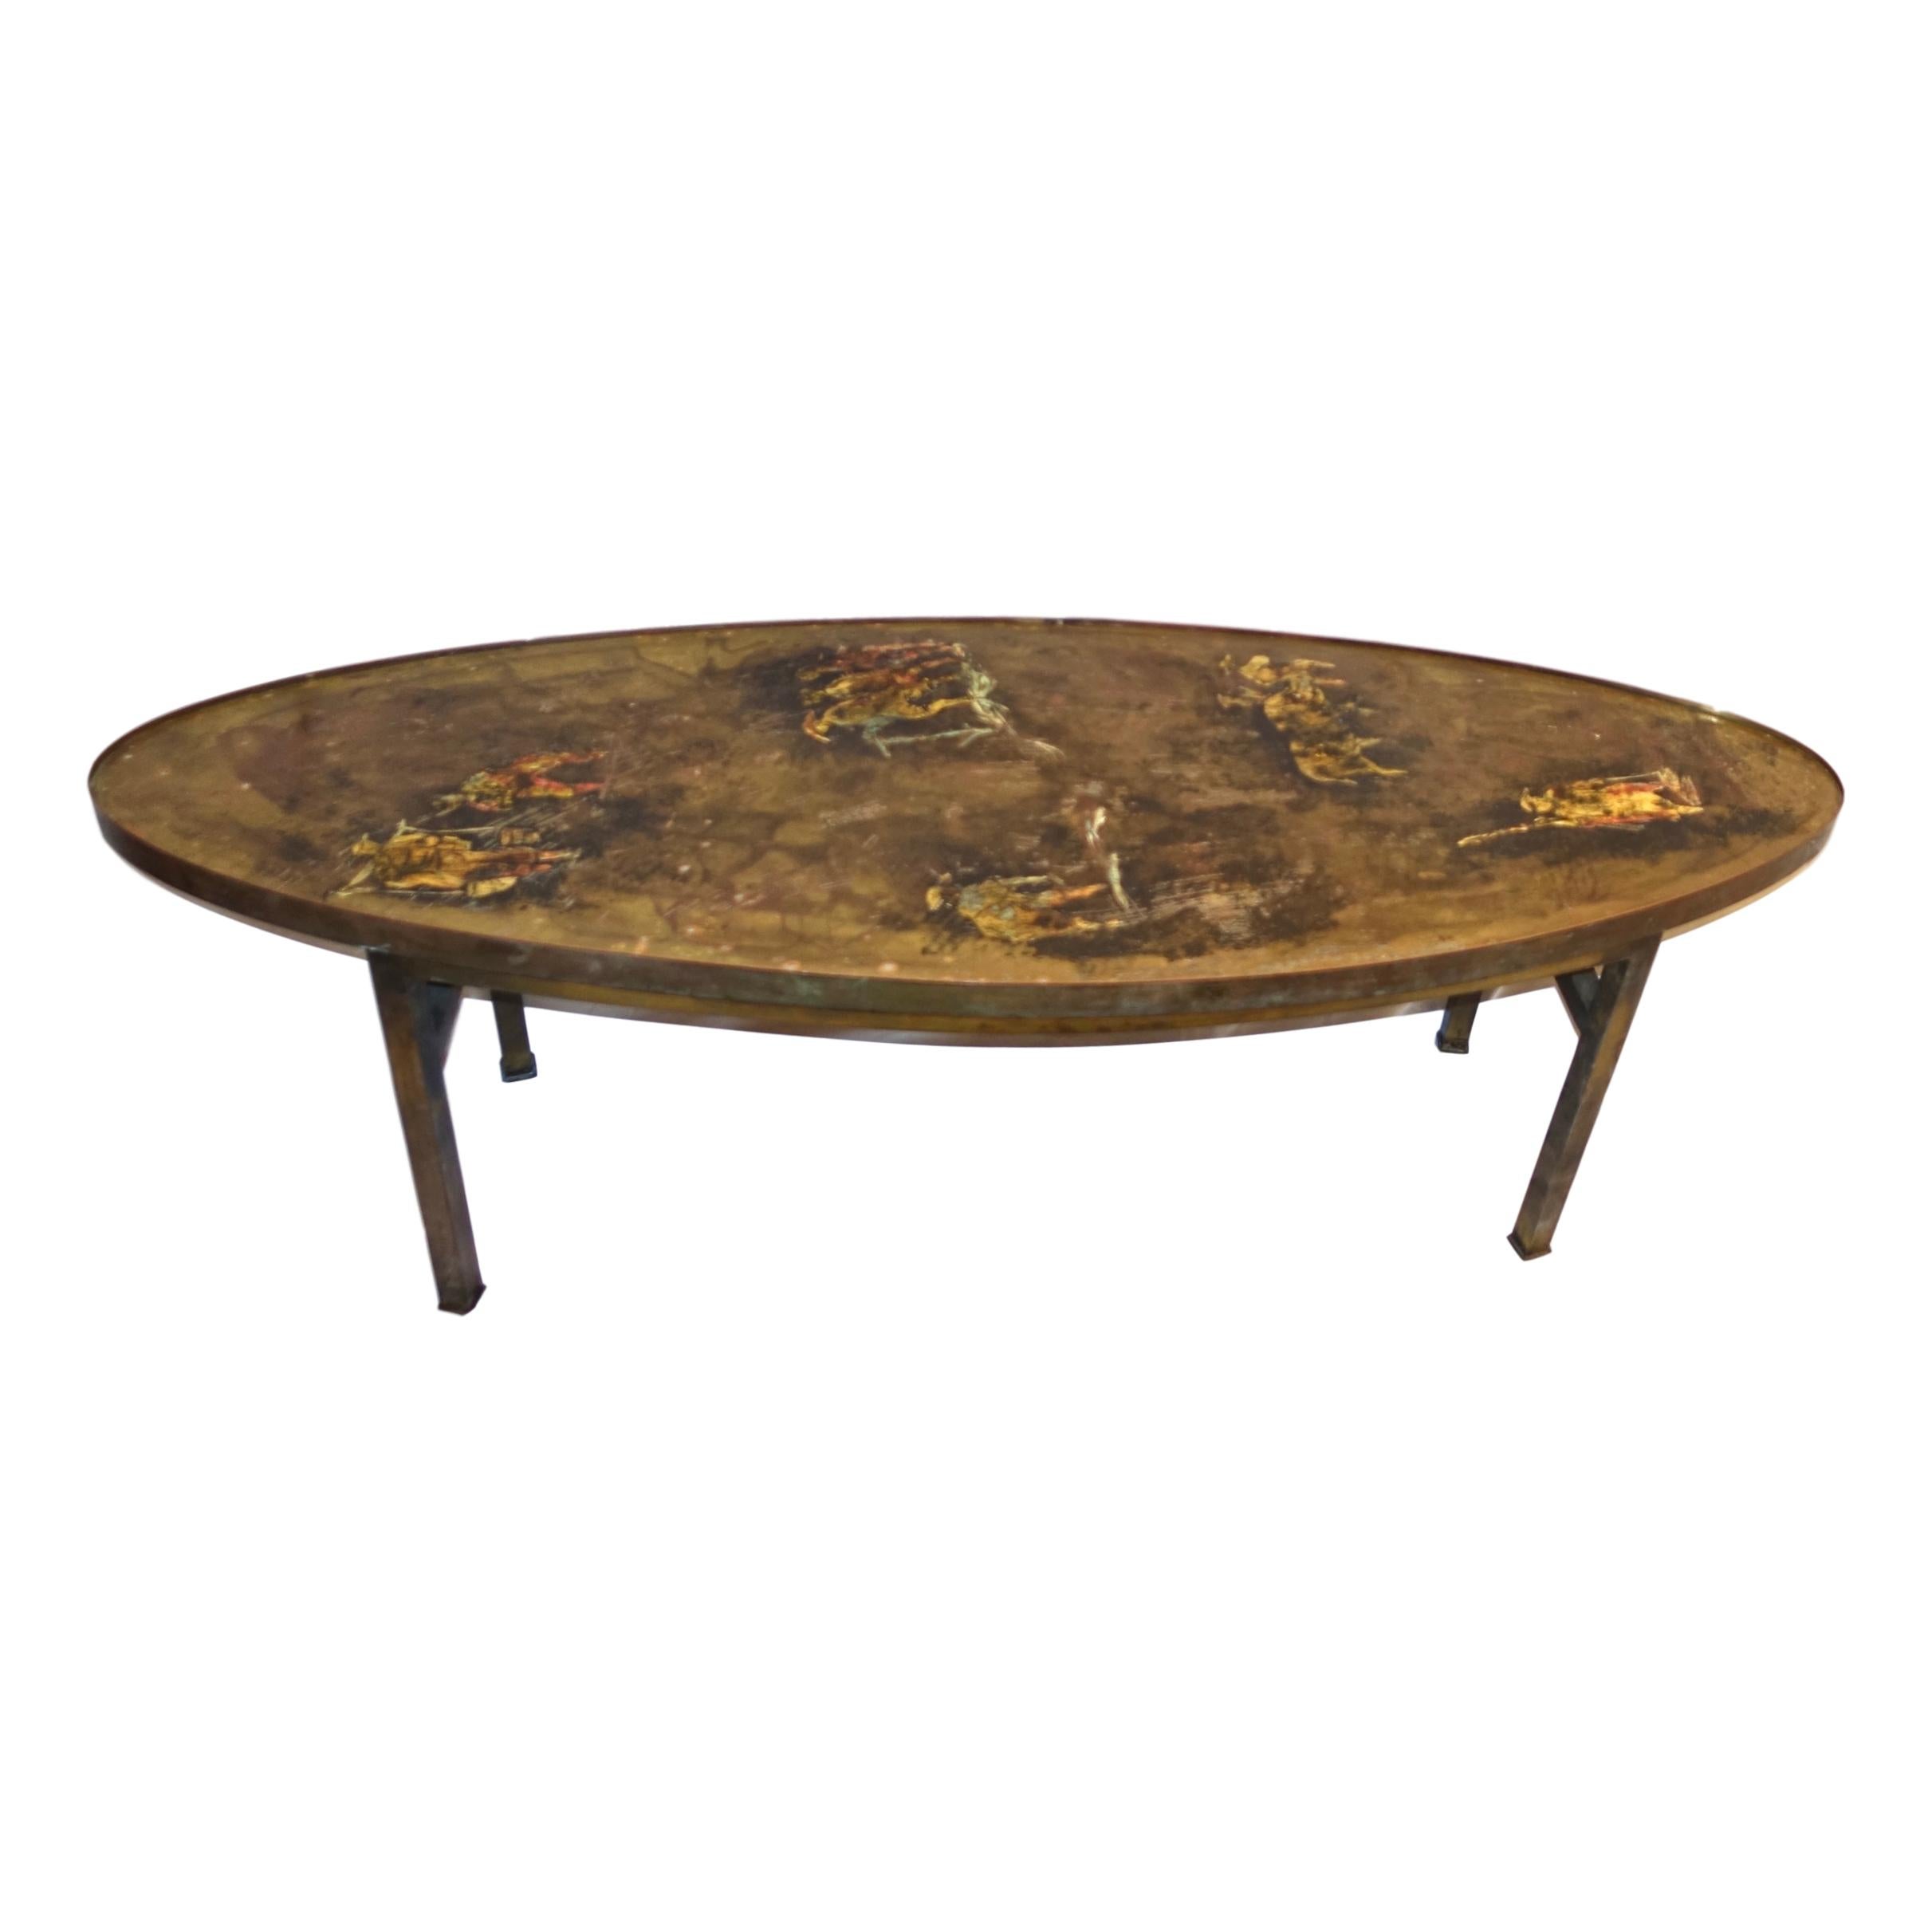 A oval-shaped cocktail table by Philip & Kelvin LaVerne with Asian motif in polychromed and acid-etched patinated bronze.

Measurements:
Length: 54.5?
Height: 17.5?
Width: 19?.